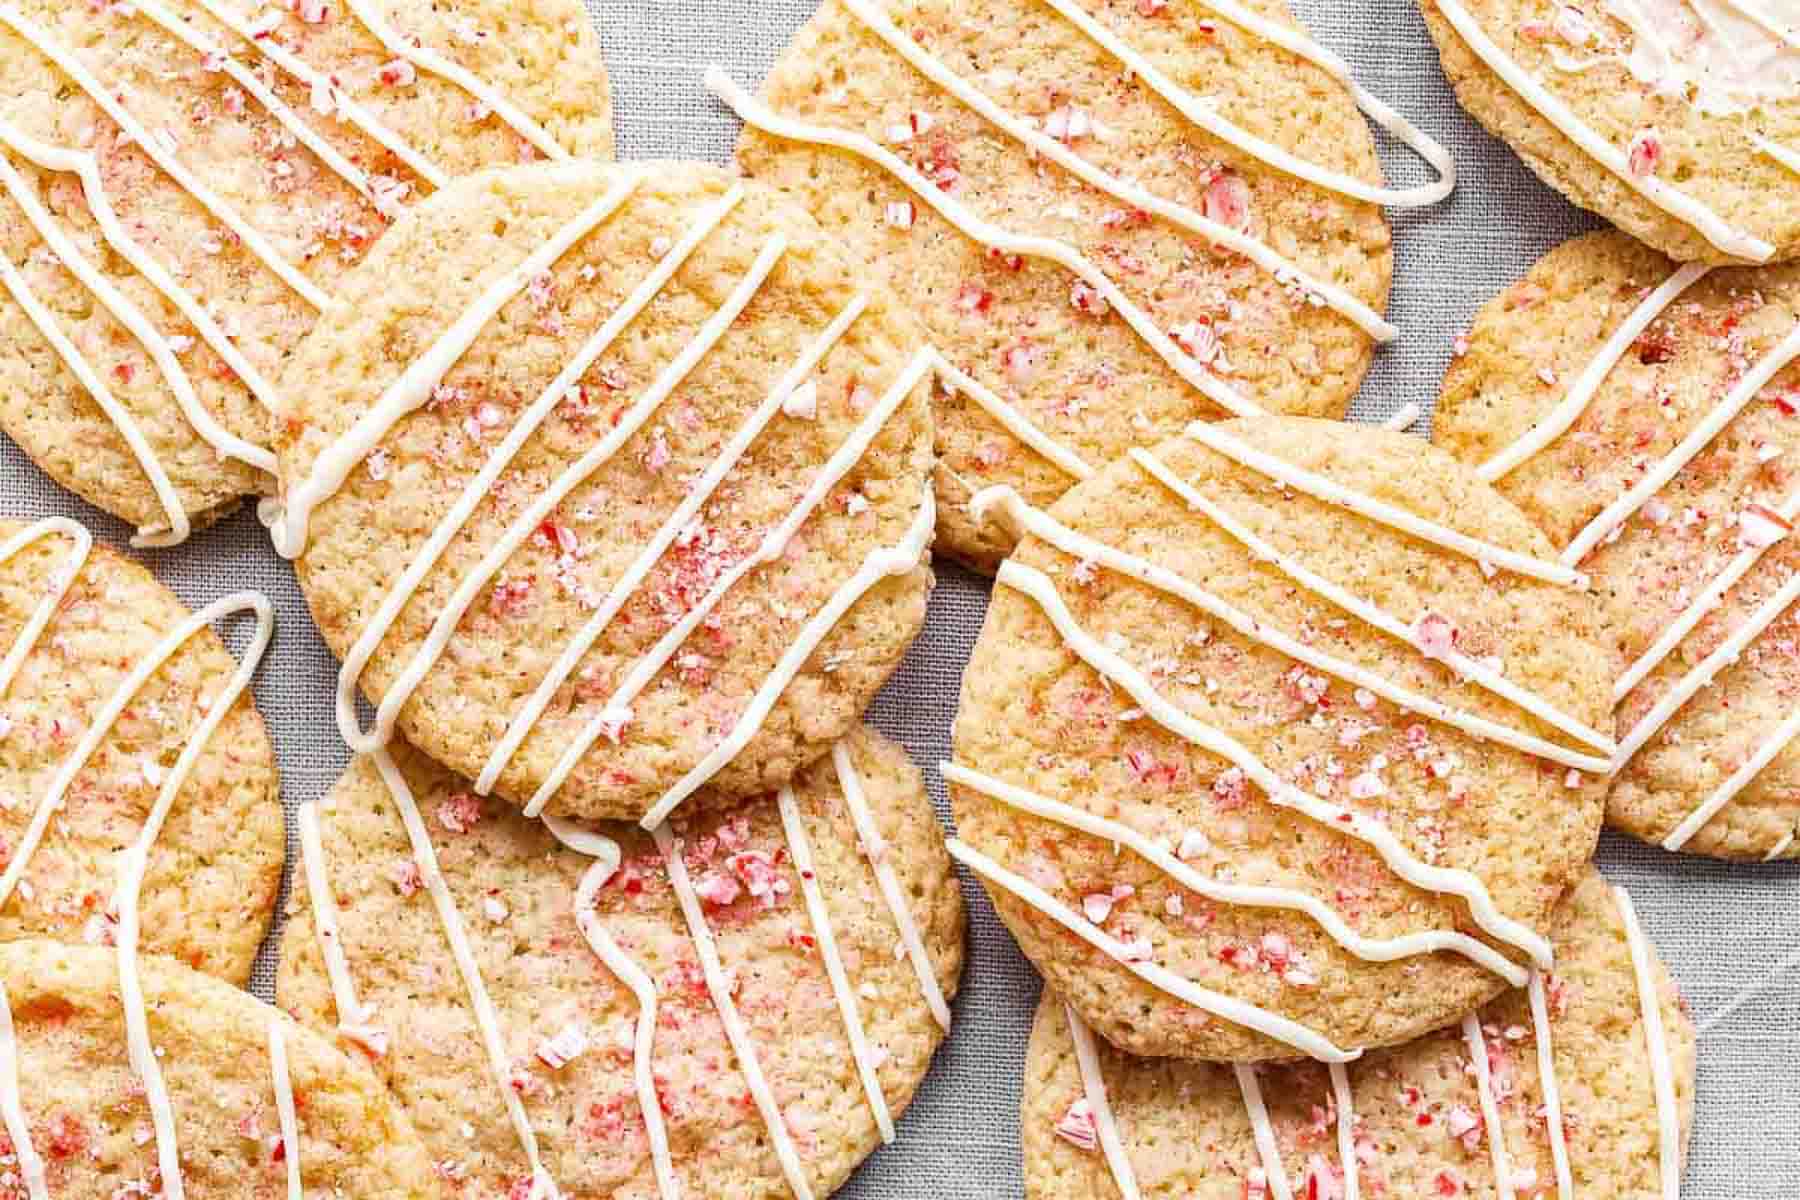 Candy cane sugar cookies drizzled with white chocolate and crushed peppermints.